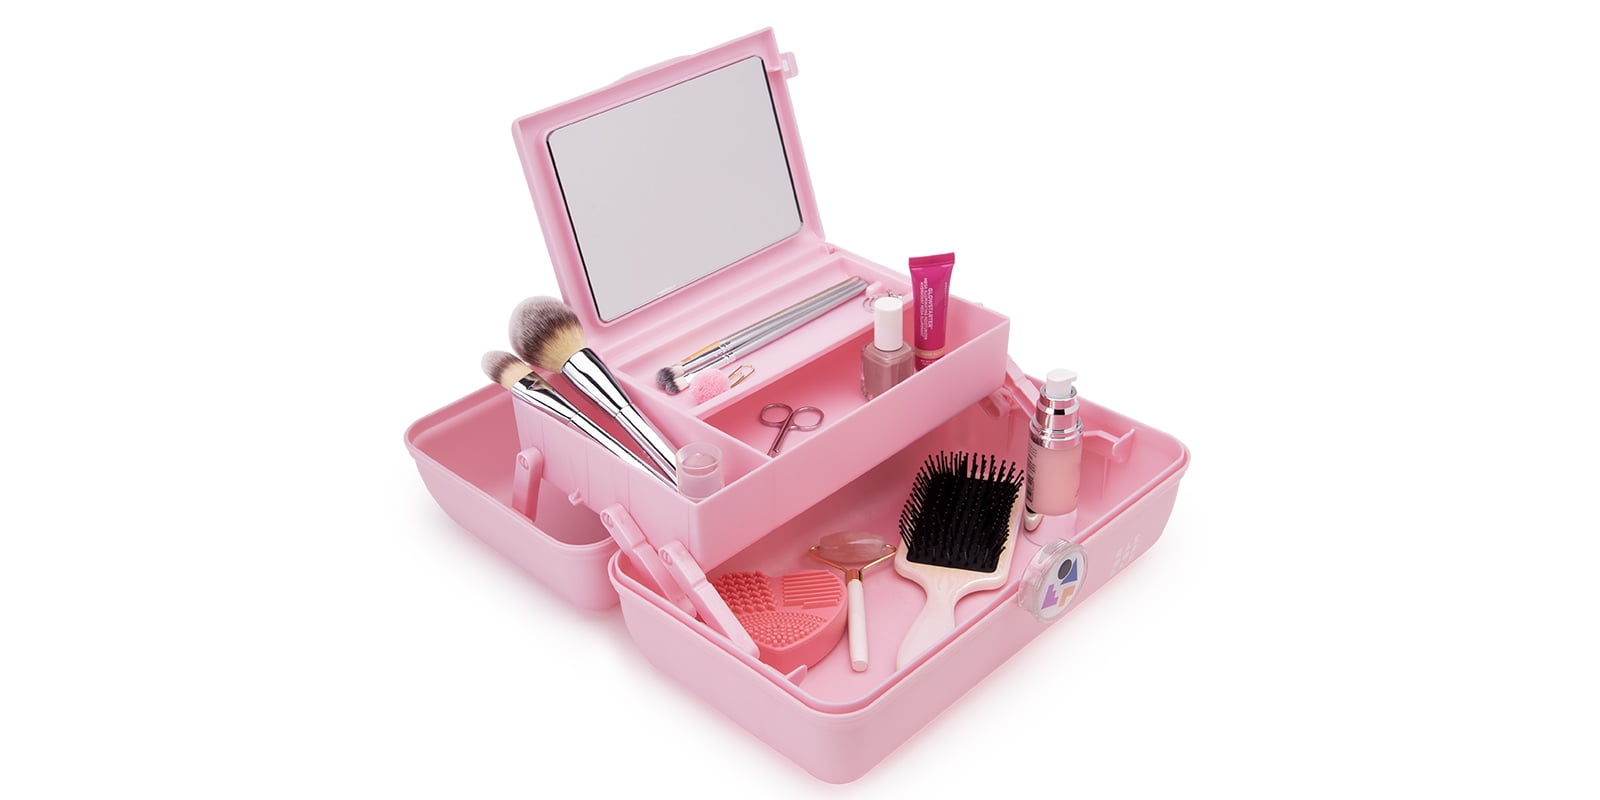  Caboodles Pretty in Petite Makeup Box, Pink Sparkle, Hard  Plastic Organizer Box, 2 Swivel Trays, Fashion Mirror, Secure Latch for  Safe Travel : Beauty & Personal Care